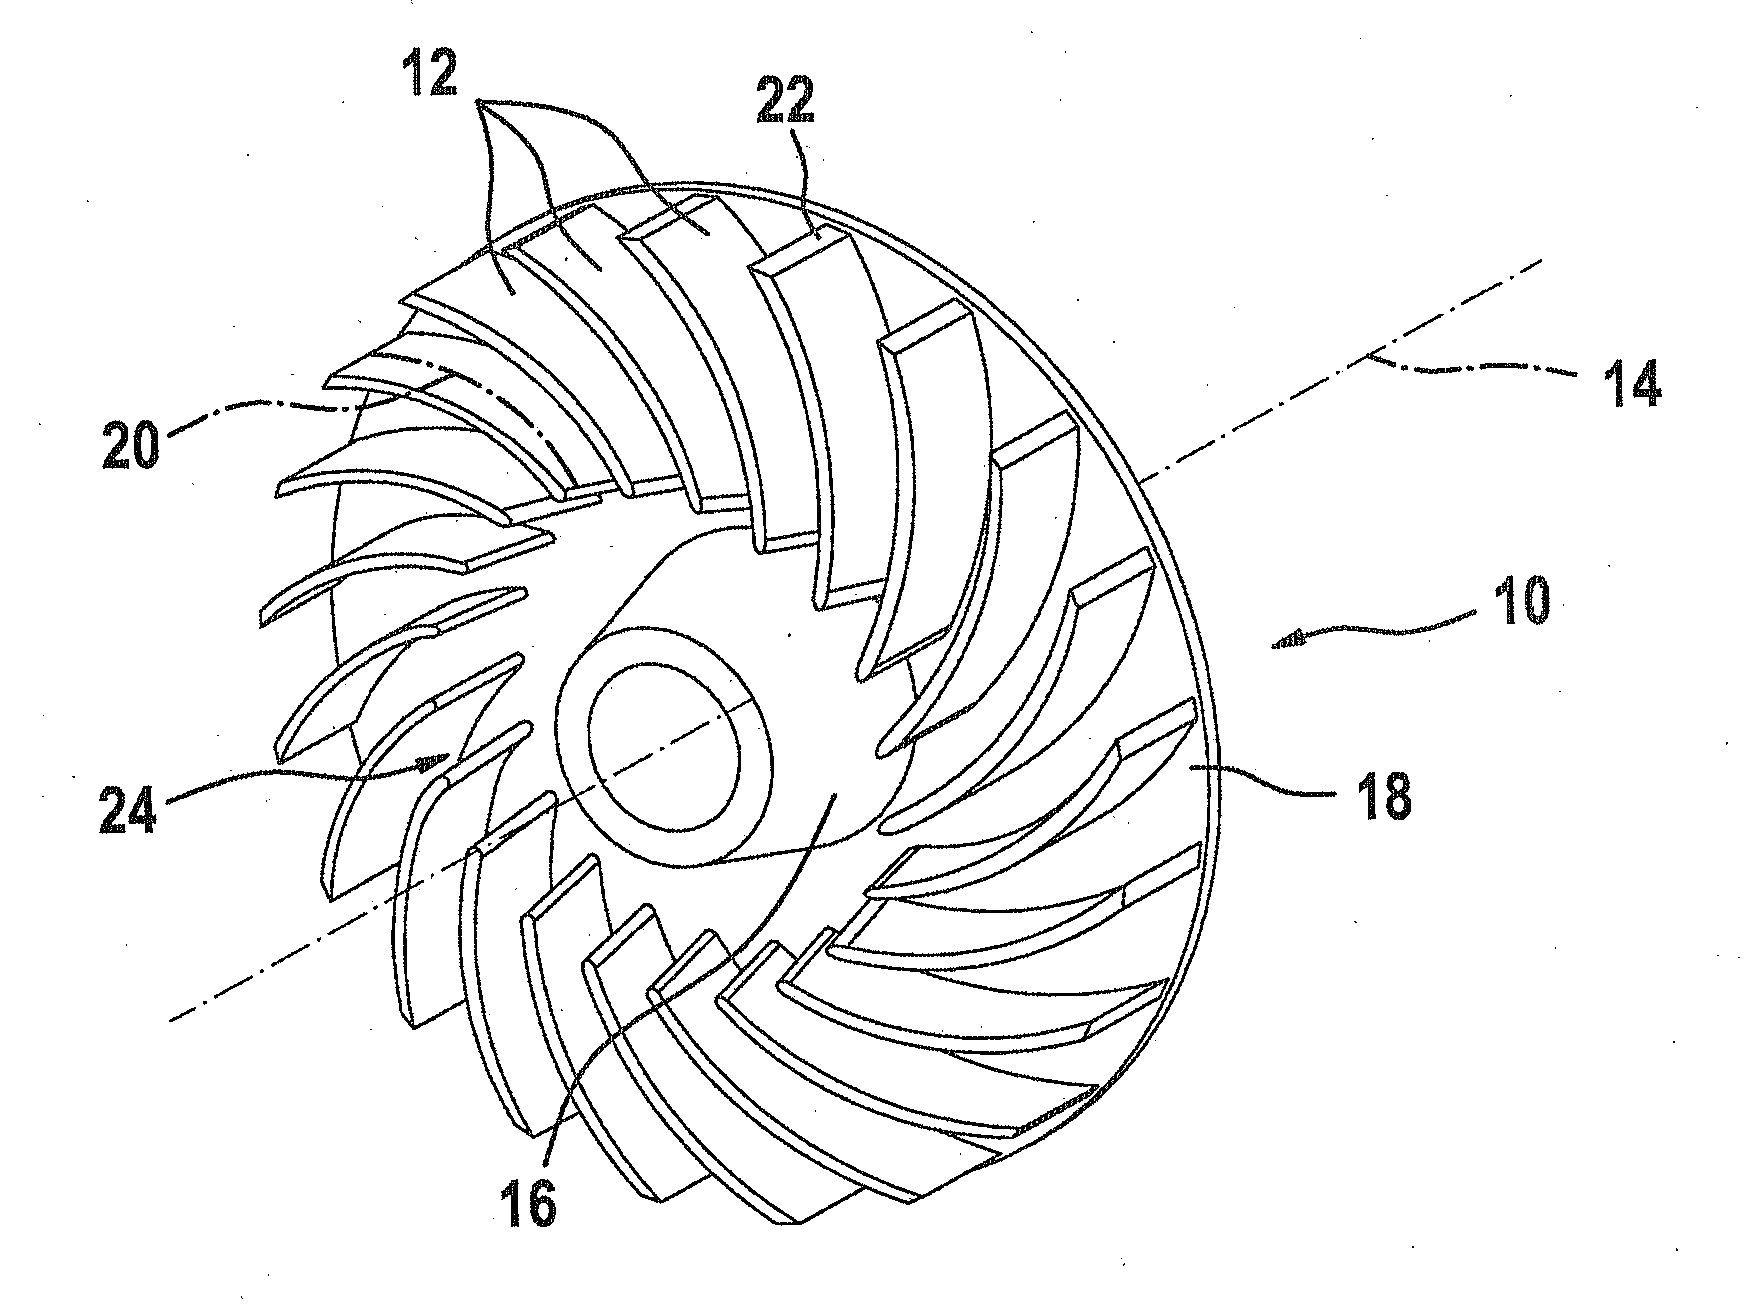 Fan and method for operating a fan